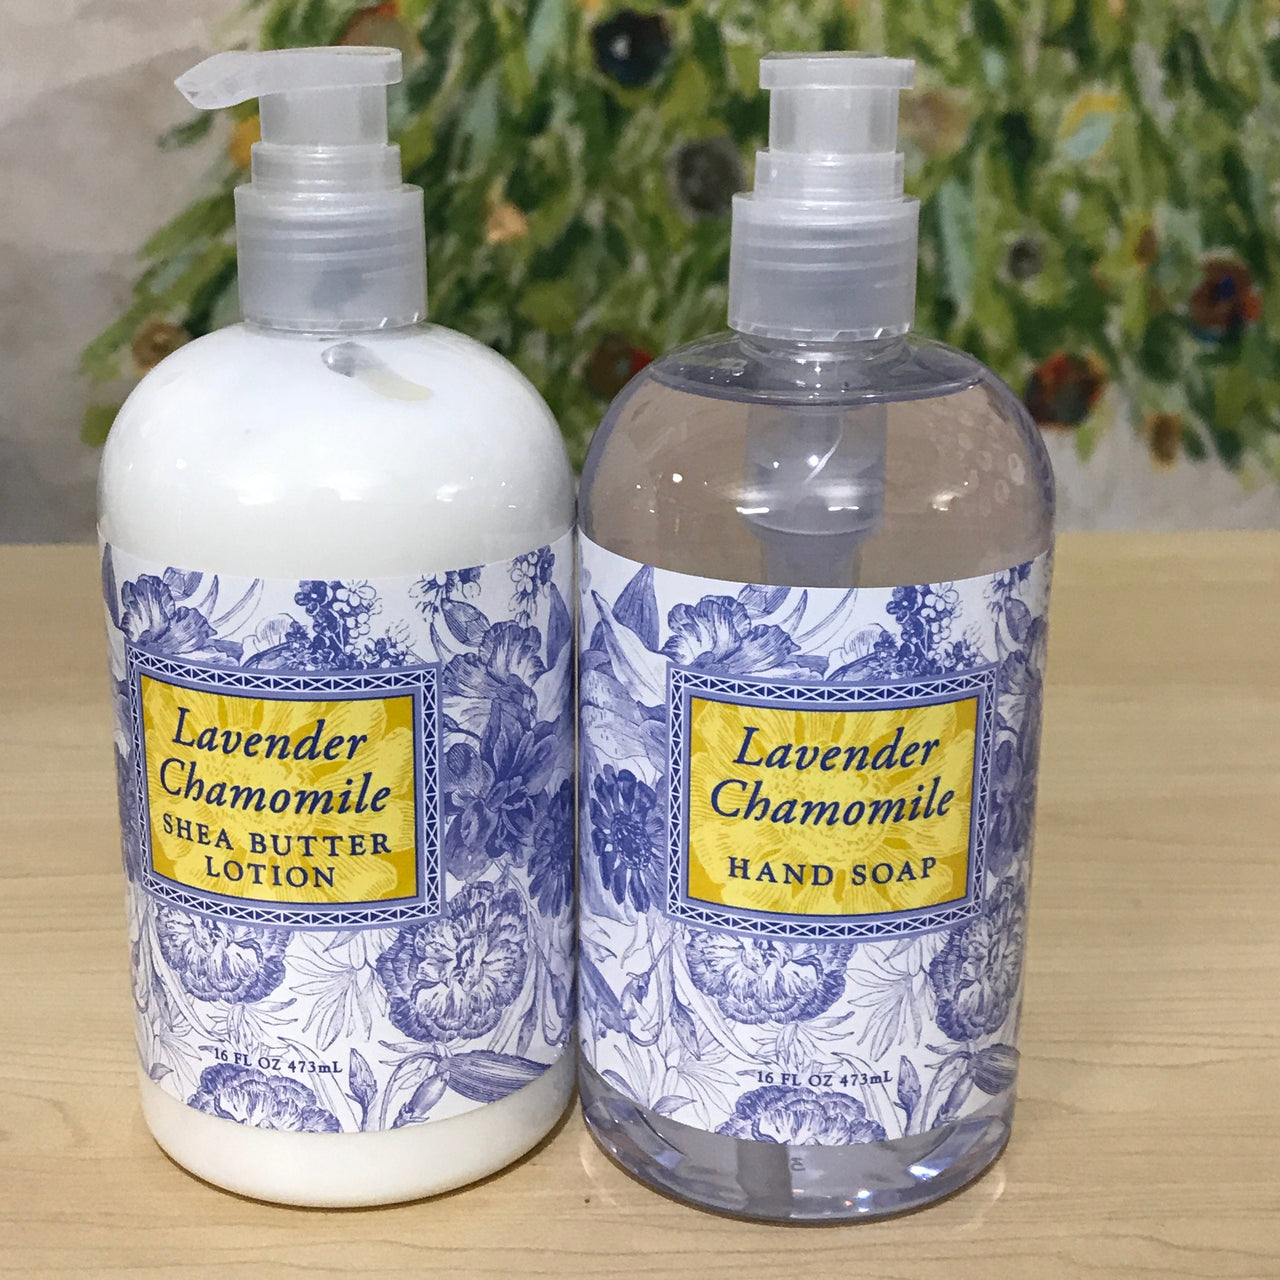 Lavender Chamomile Shea Butter Lotion & Hand Soap Greenwich Trading Company Soap Lotion